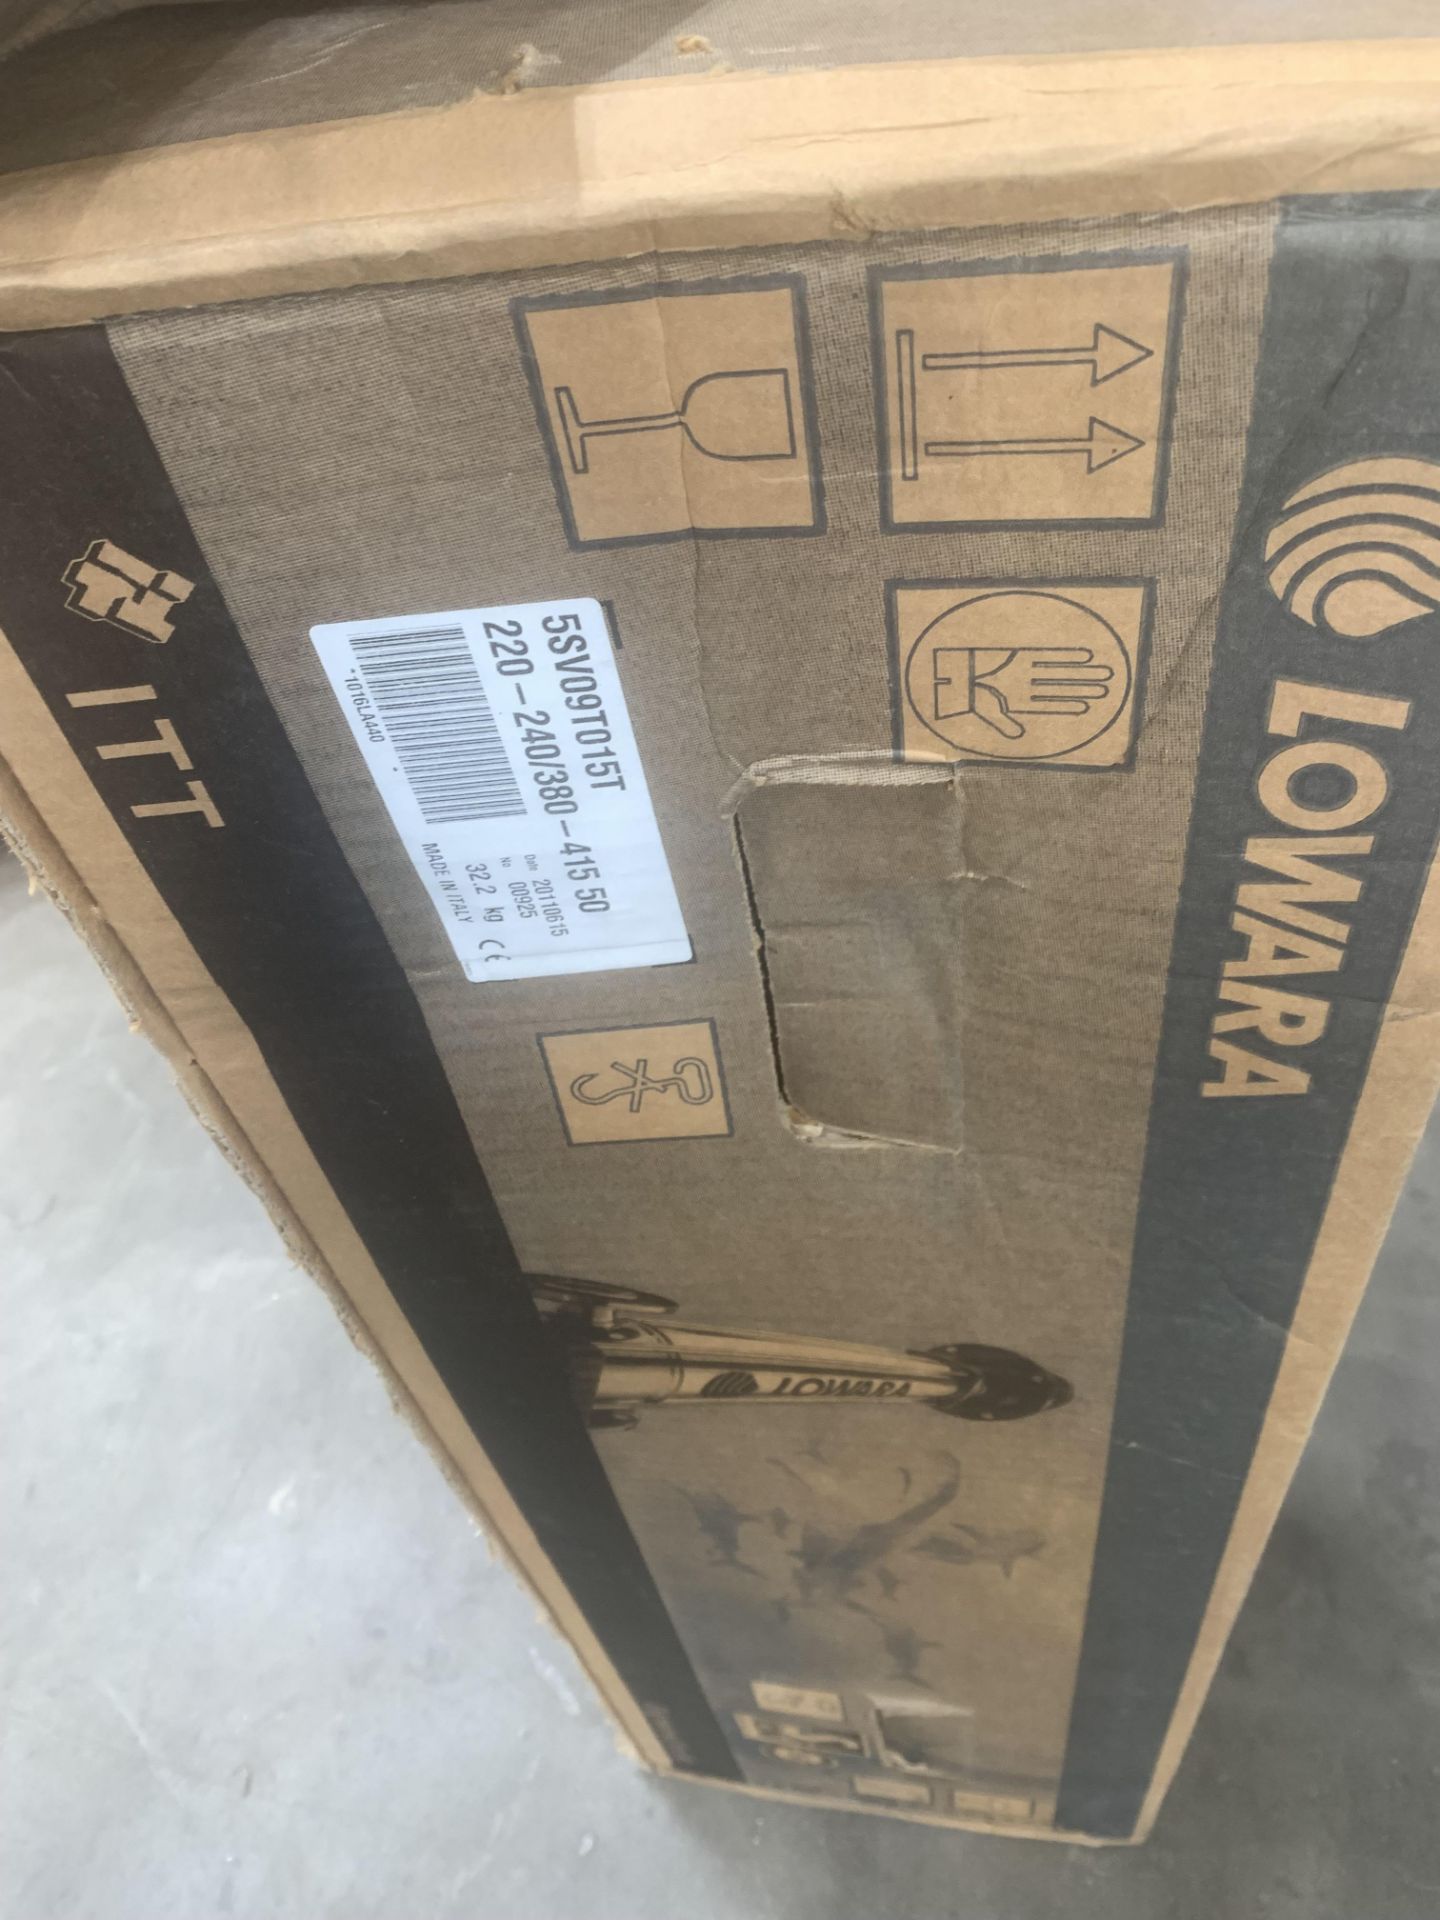 Lowara e-SV 50SV09T015T Vertical Multistage Pump (new unused in box), loading free of charge - - Image 2 of 4